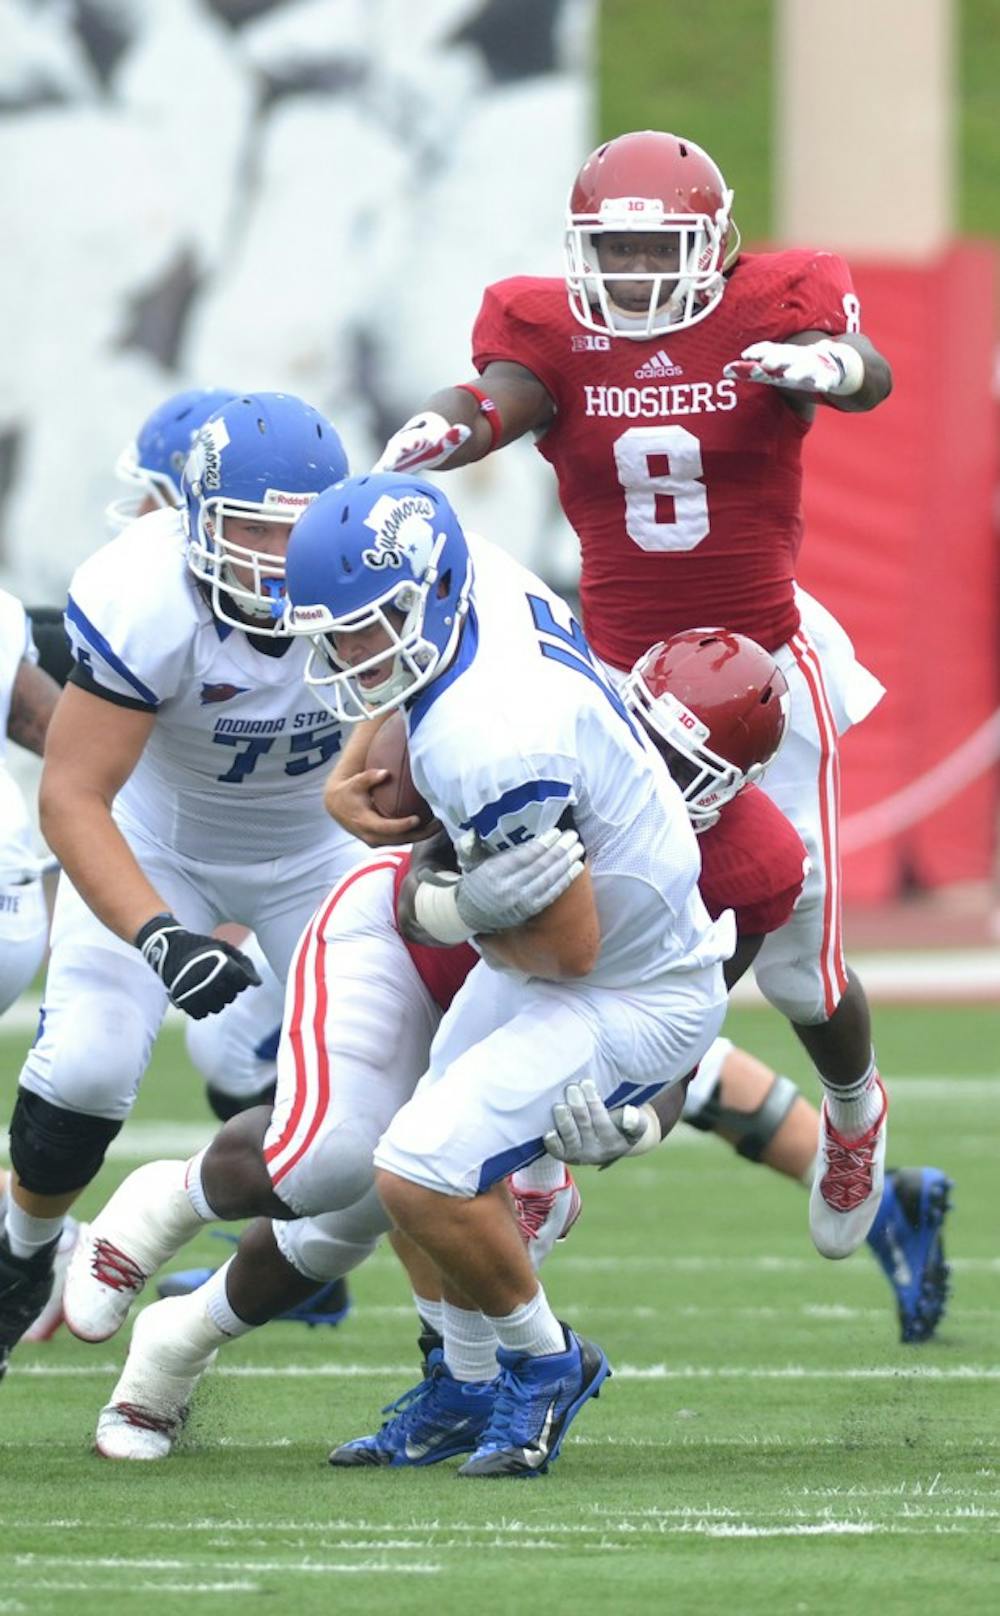 Freshman Tegray Scales jumps over senior Bobby Richardson as they make a tackle in IU's game against Indiana State on Aug. 30 at Memorial Stadium.